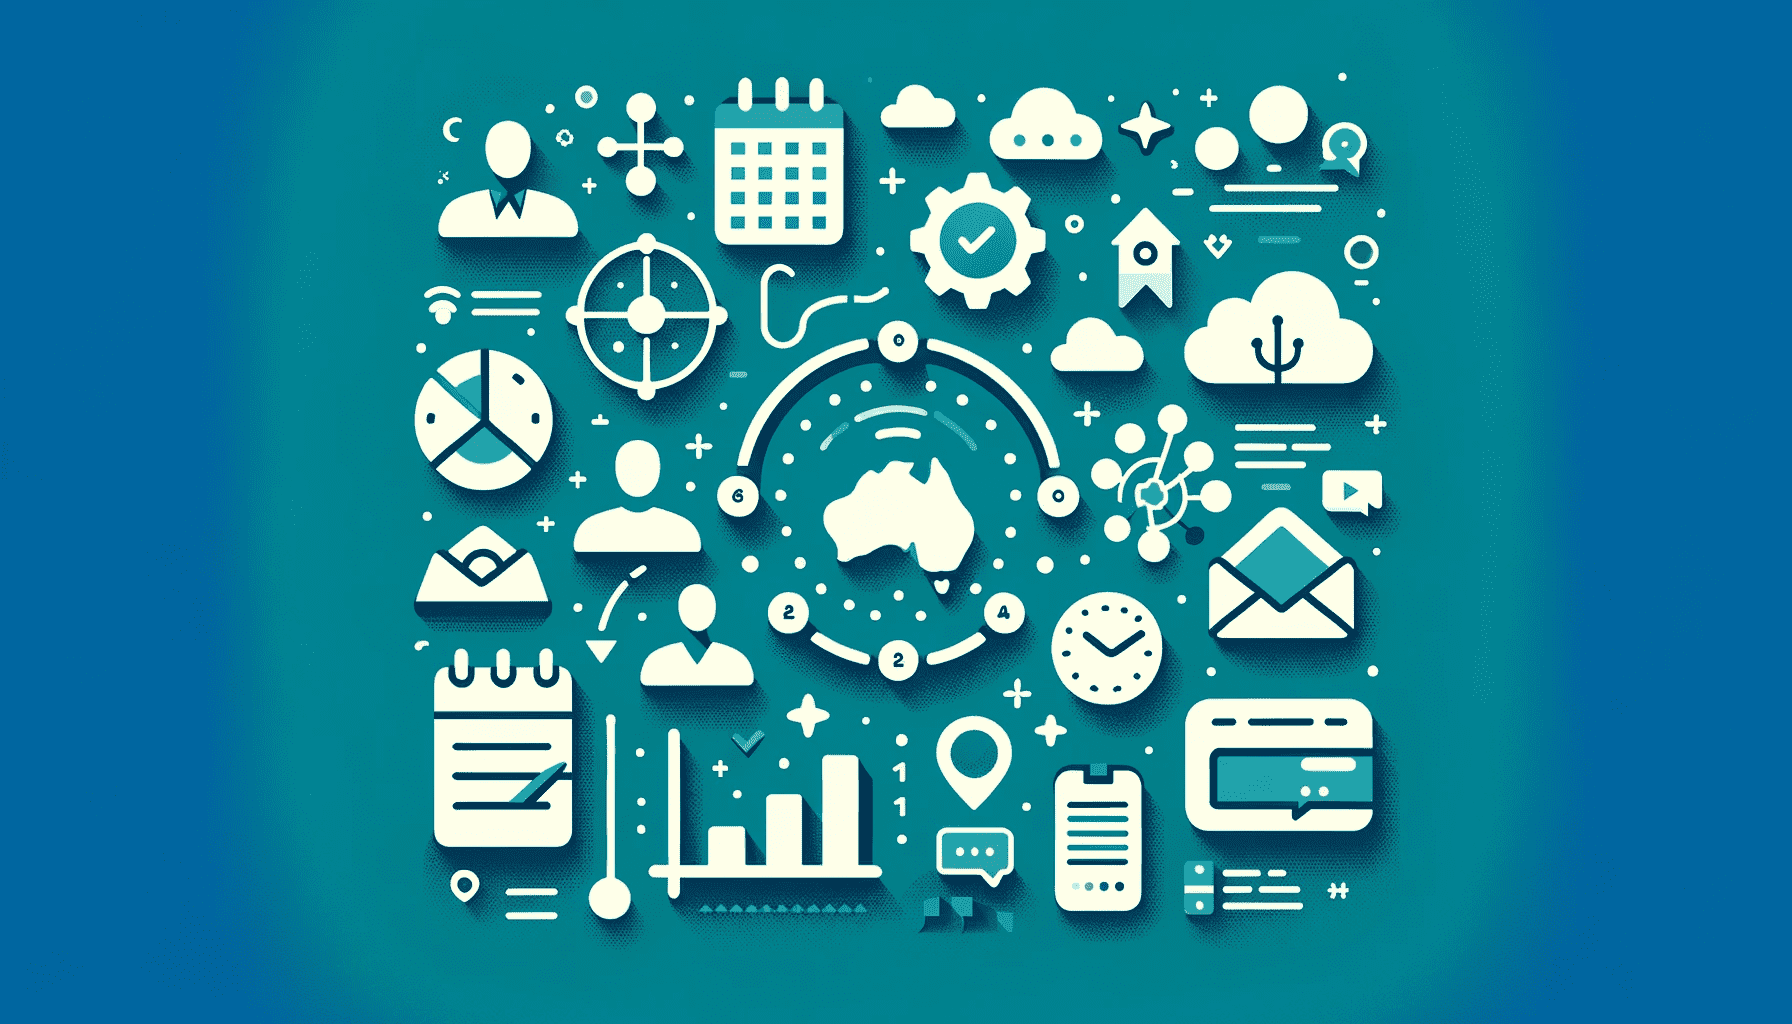 Hero image for 'Best HR Software in Australia' article, featuring Australian map and surrounding HR system icons